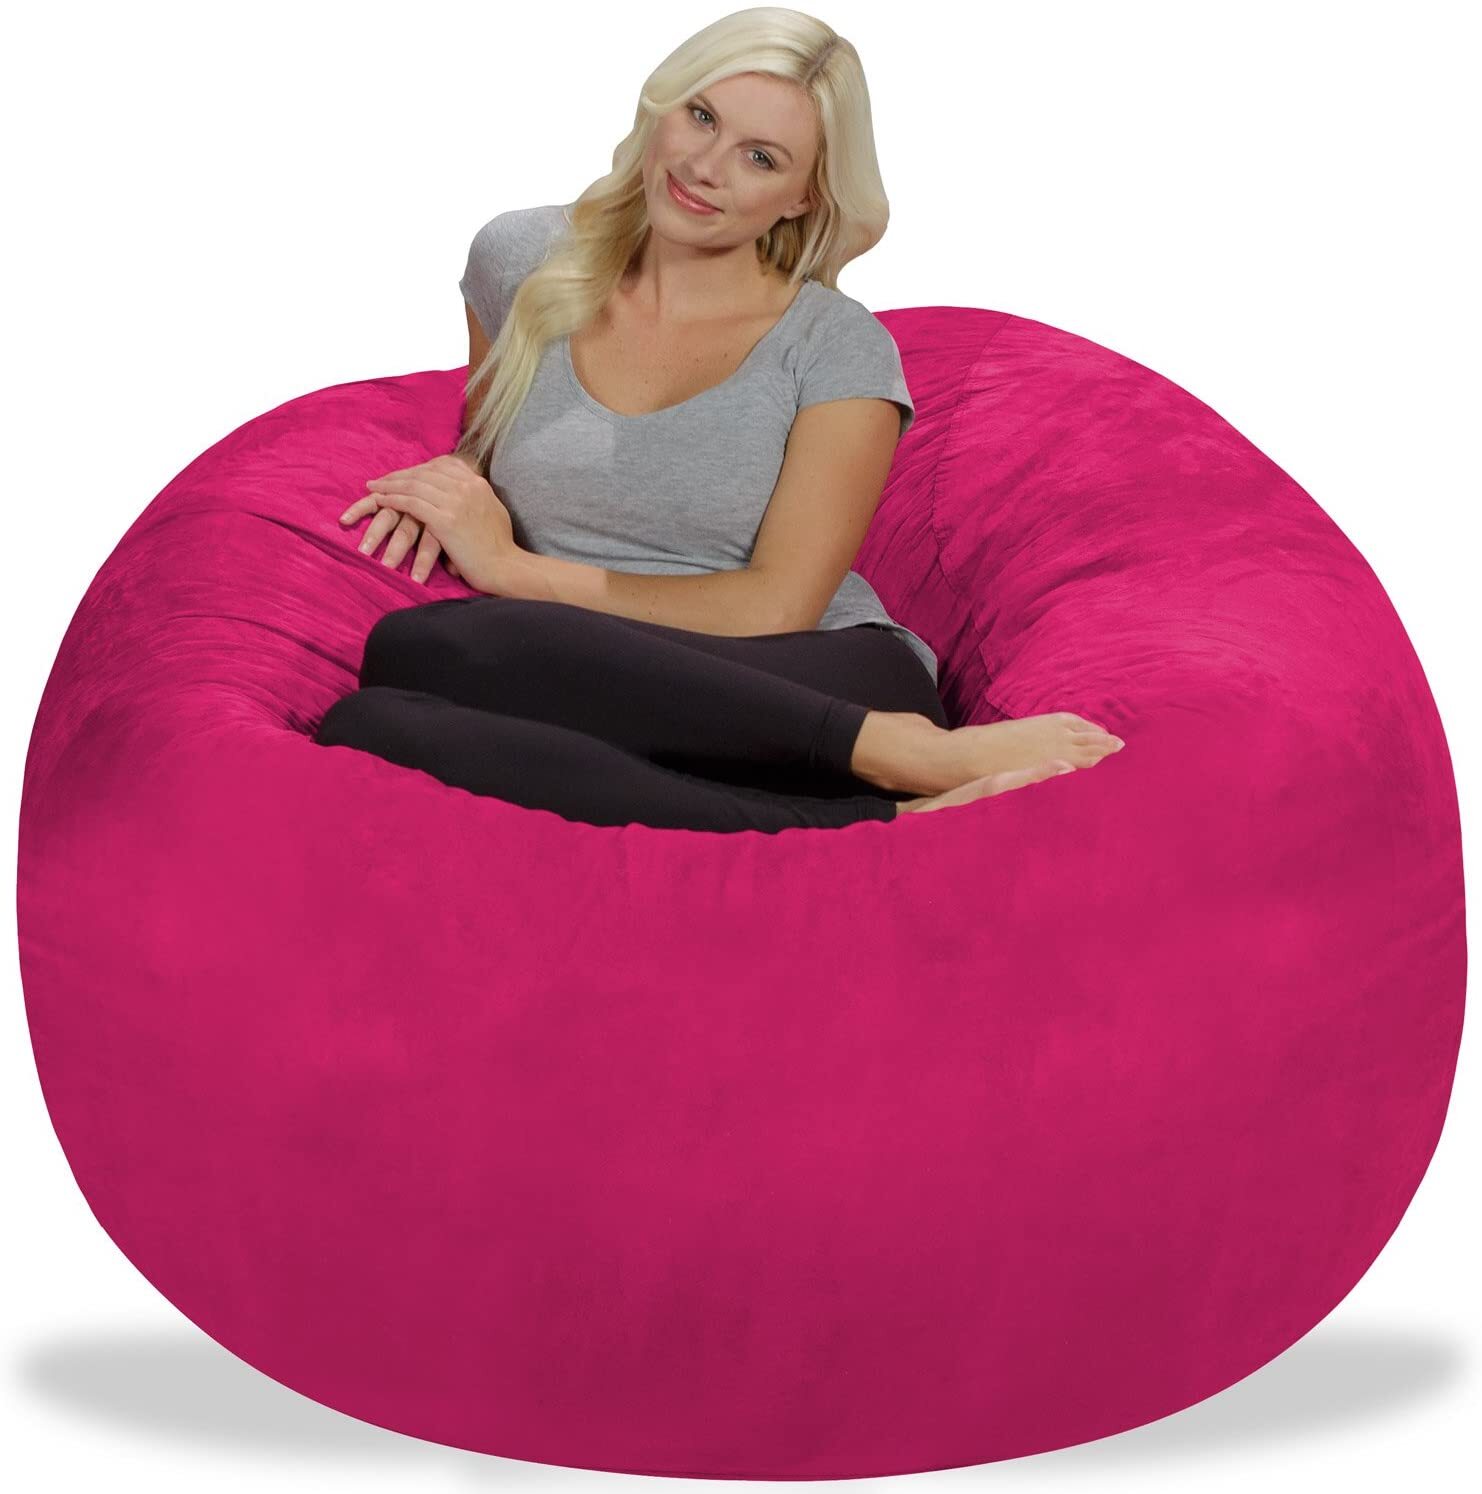 Large round chair in a bean bag style